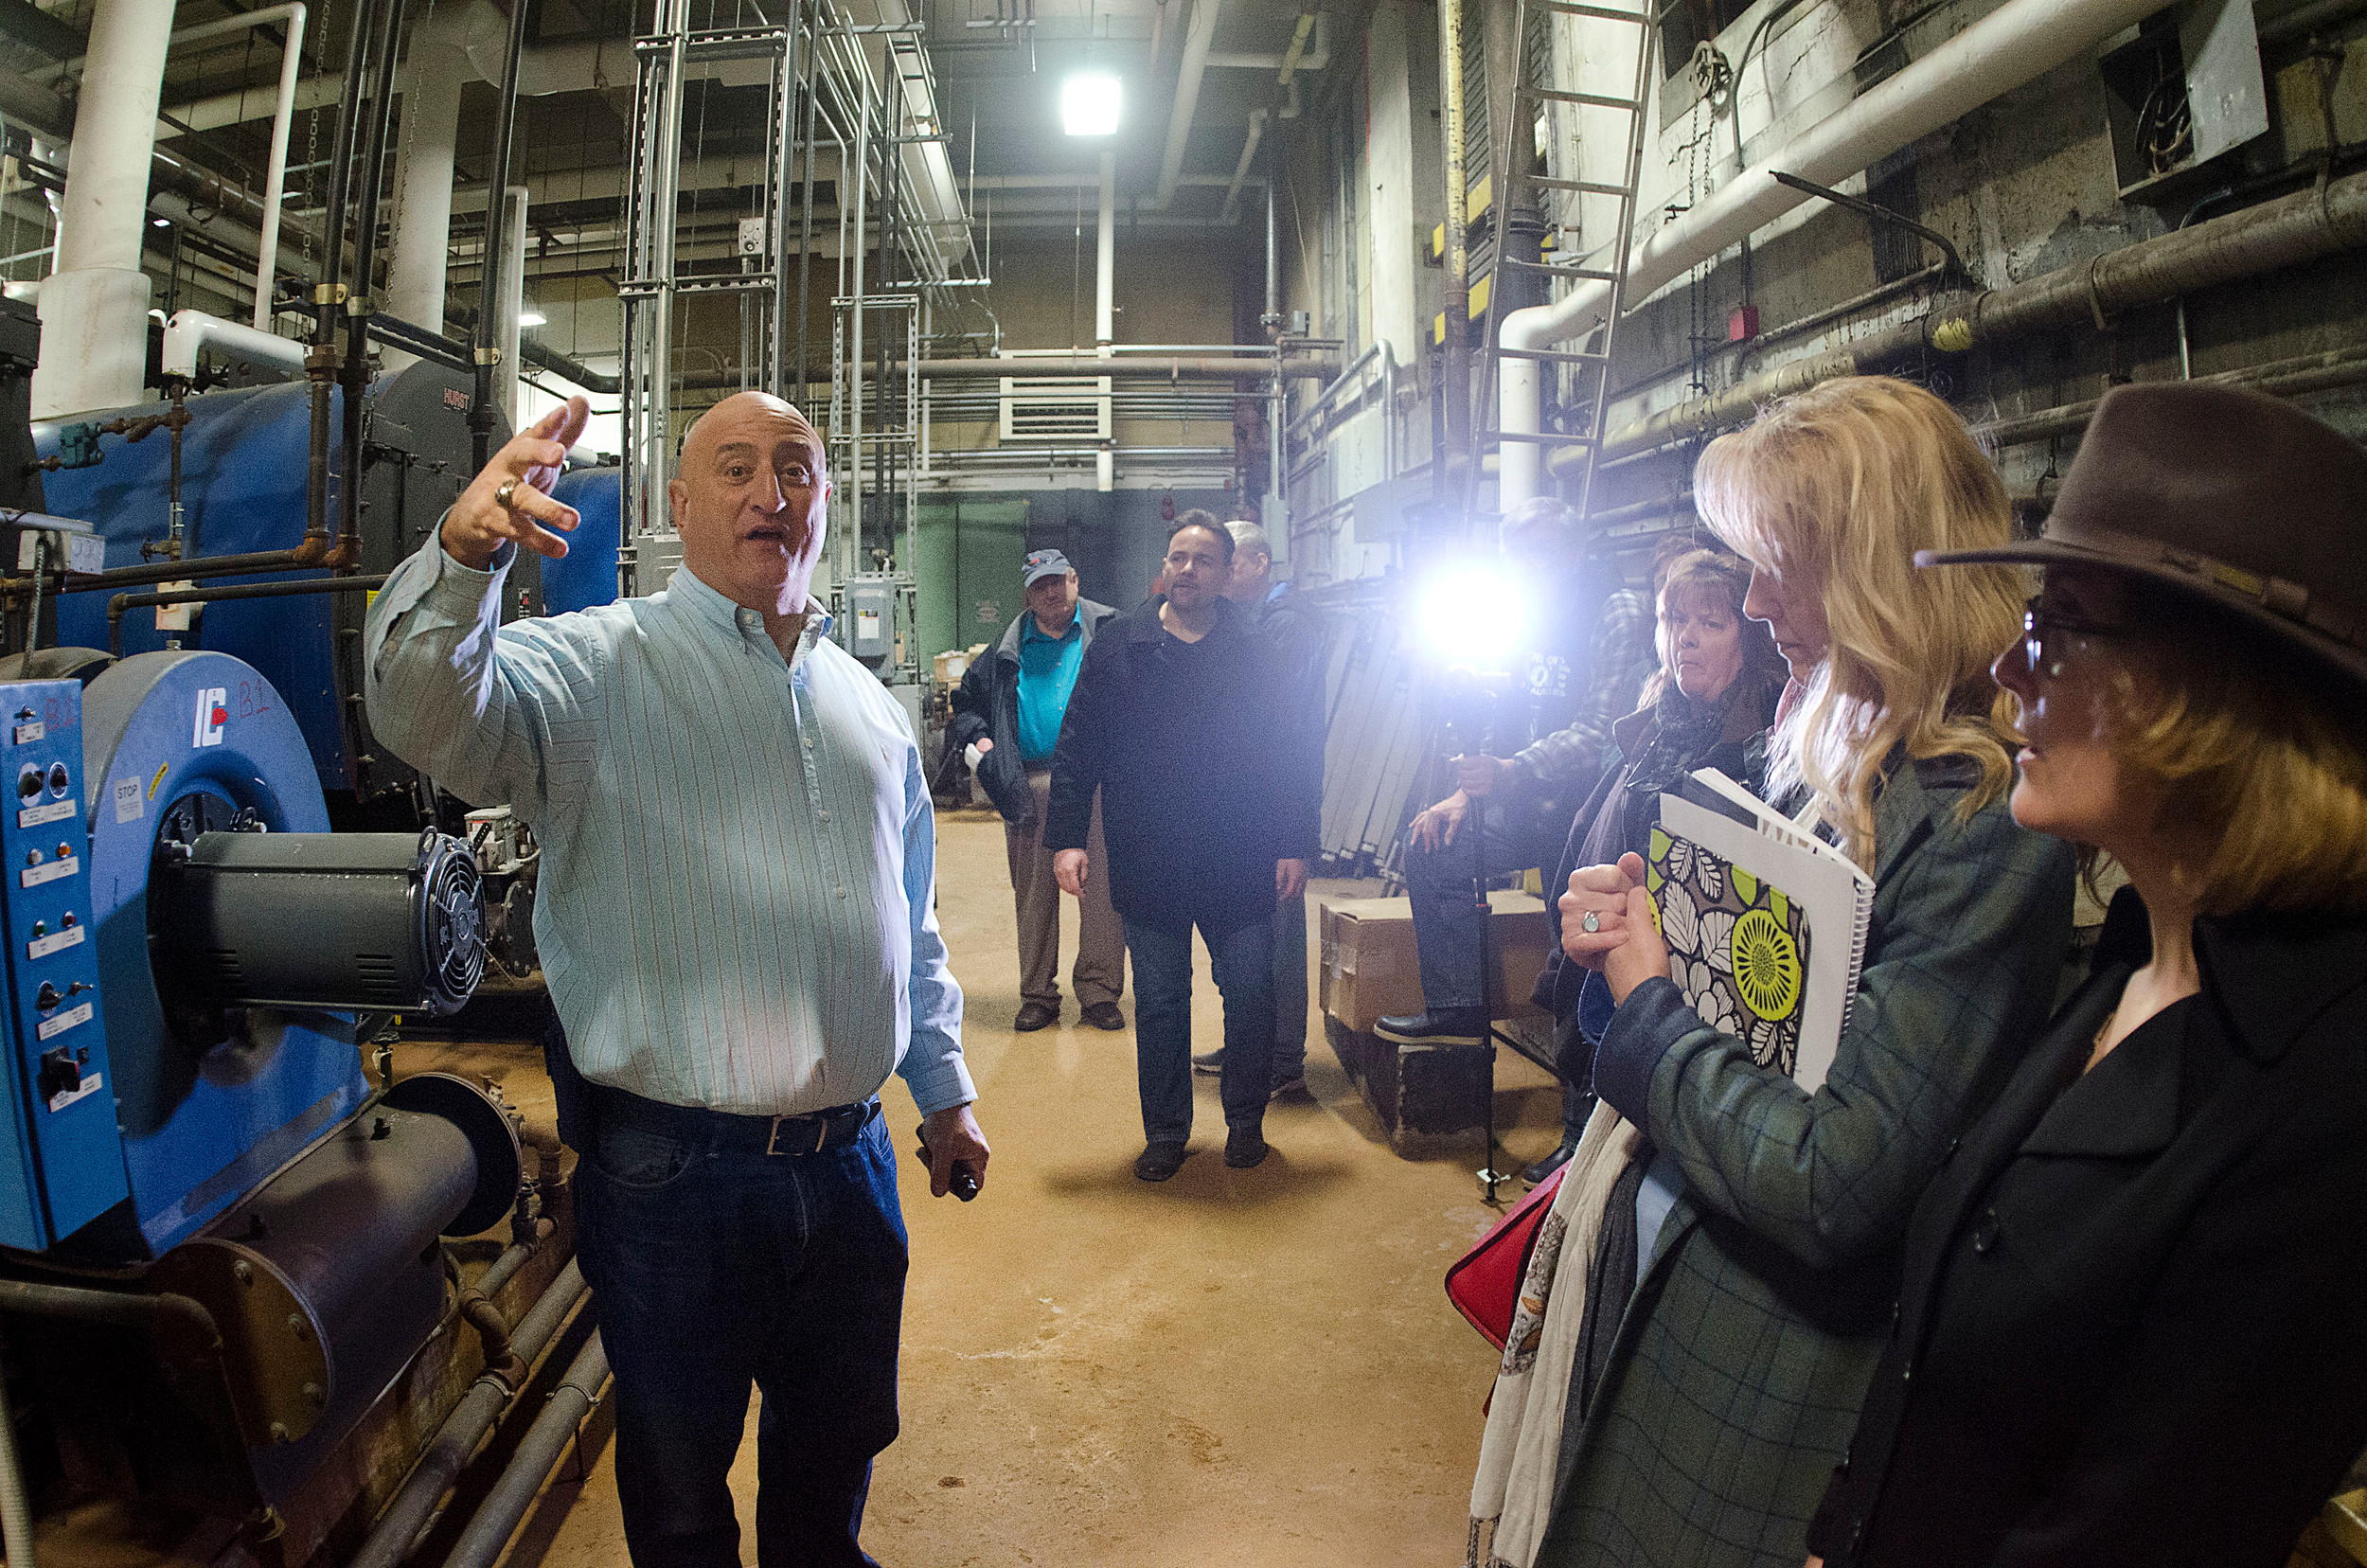 High school facilities director Tony Feola gives a tour of the school's boiler room to school committee and city council members. He explains that their is standing water underneath the boiler room.